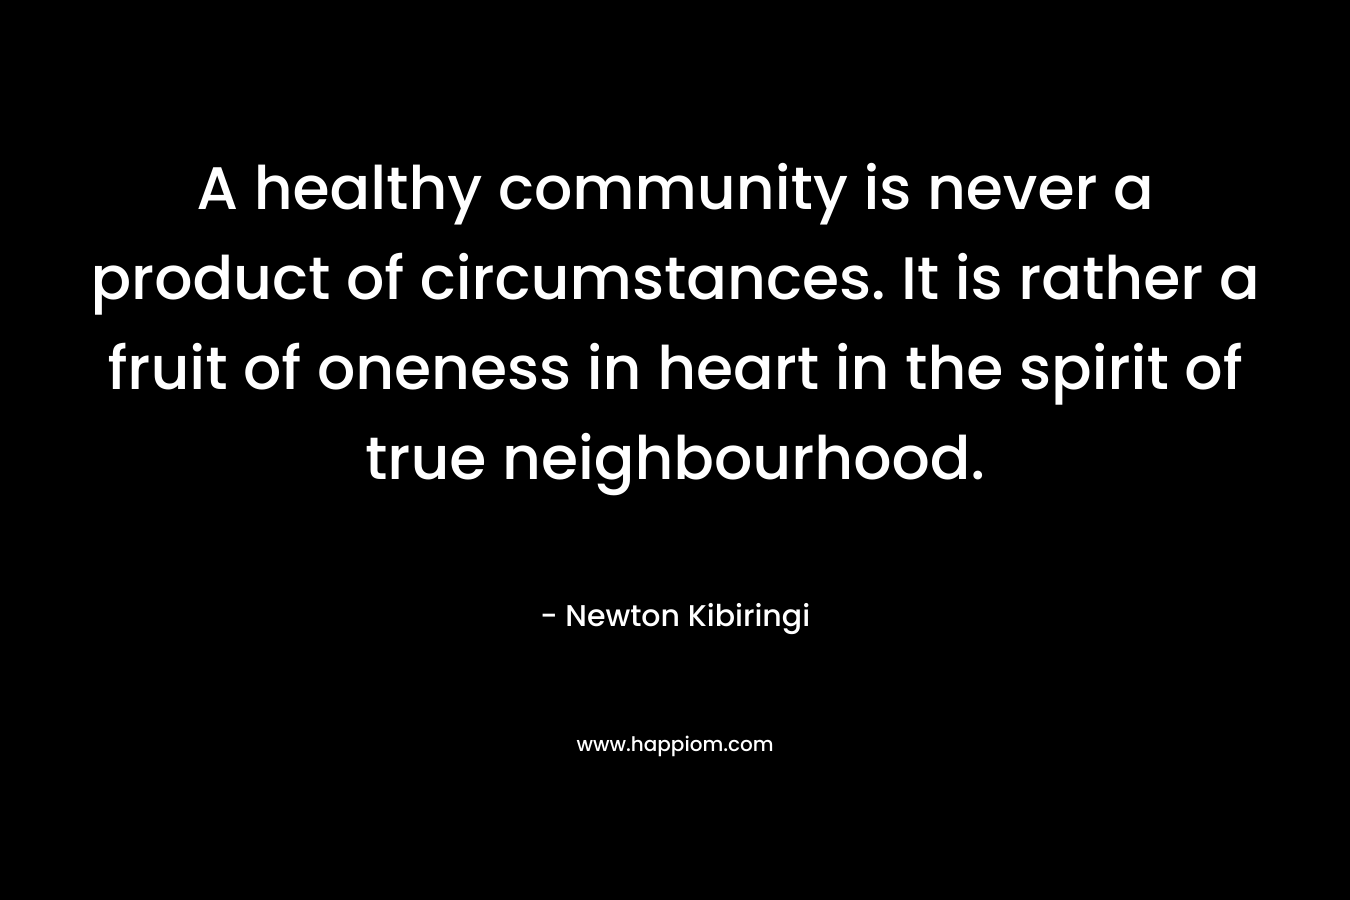 A healthy community is never a product of circumstances. It is rather a fruit of oneness in heart in the spirit of true neighbourhood.